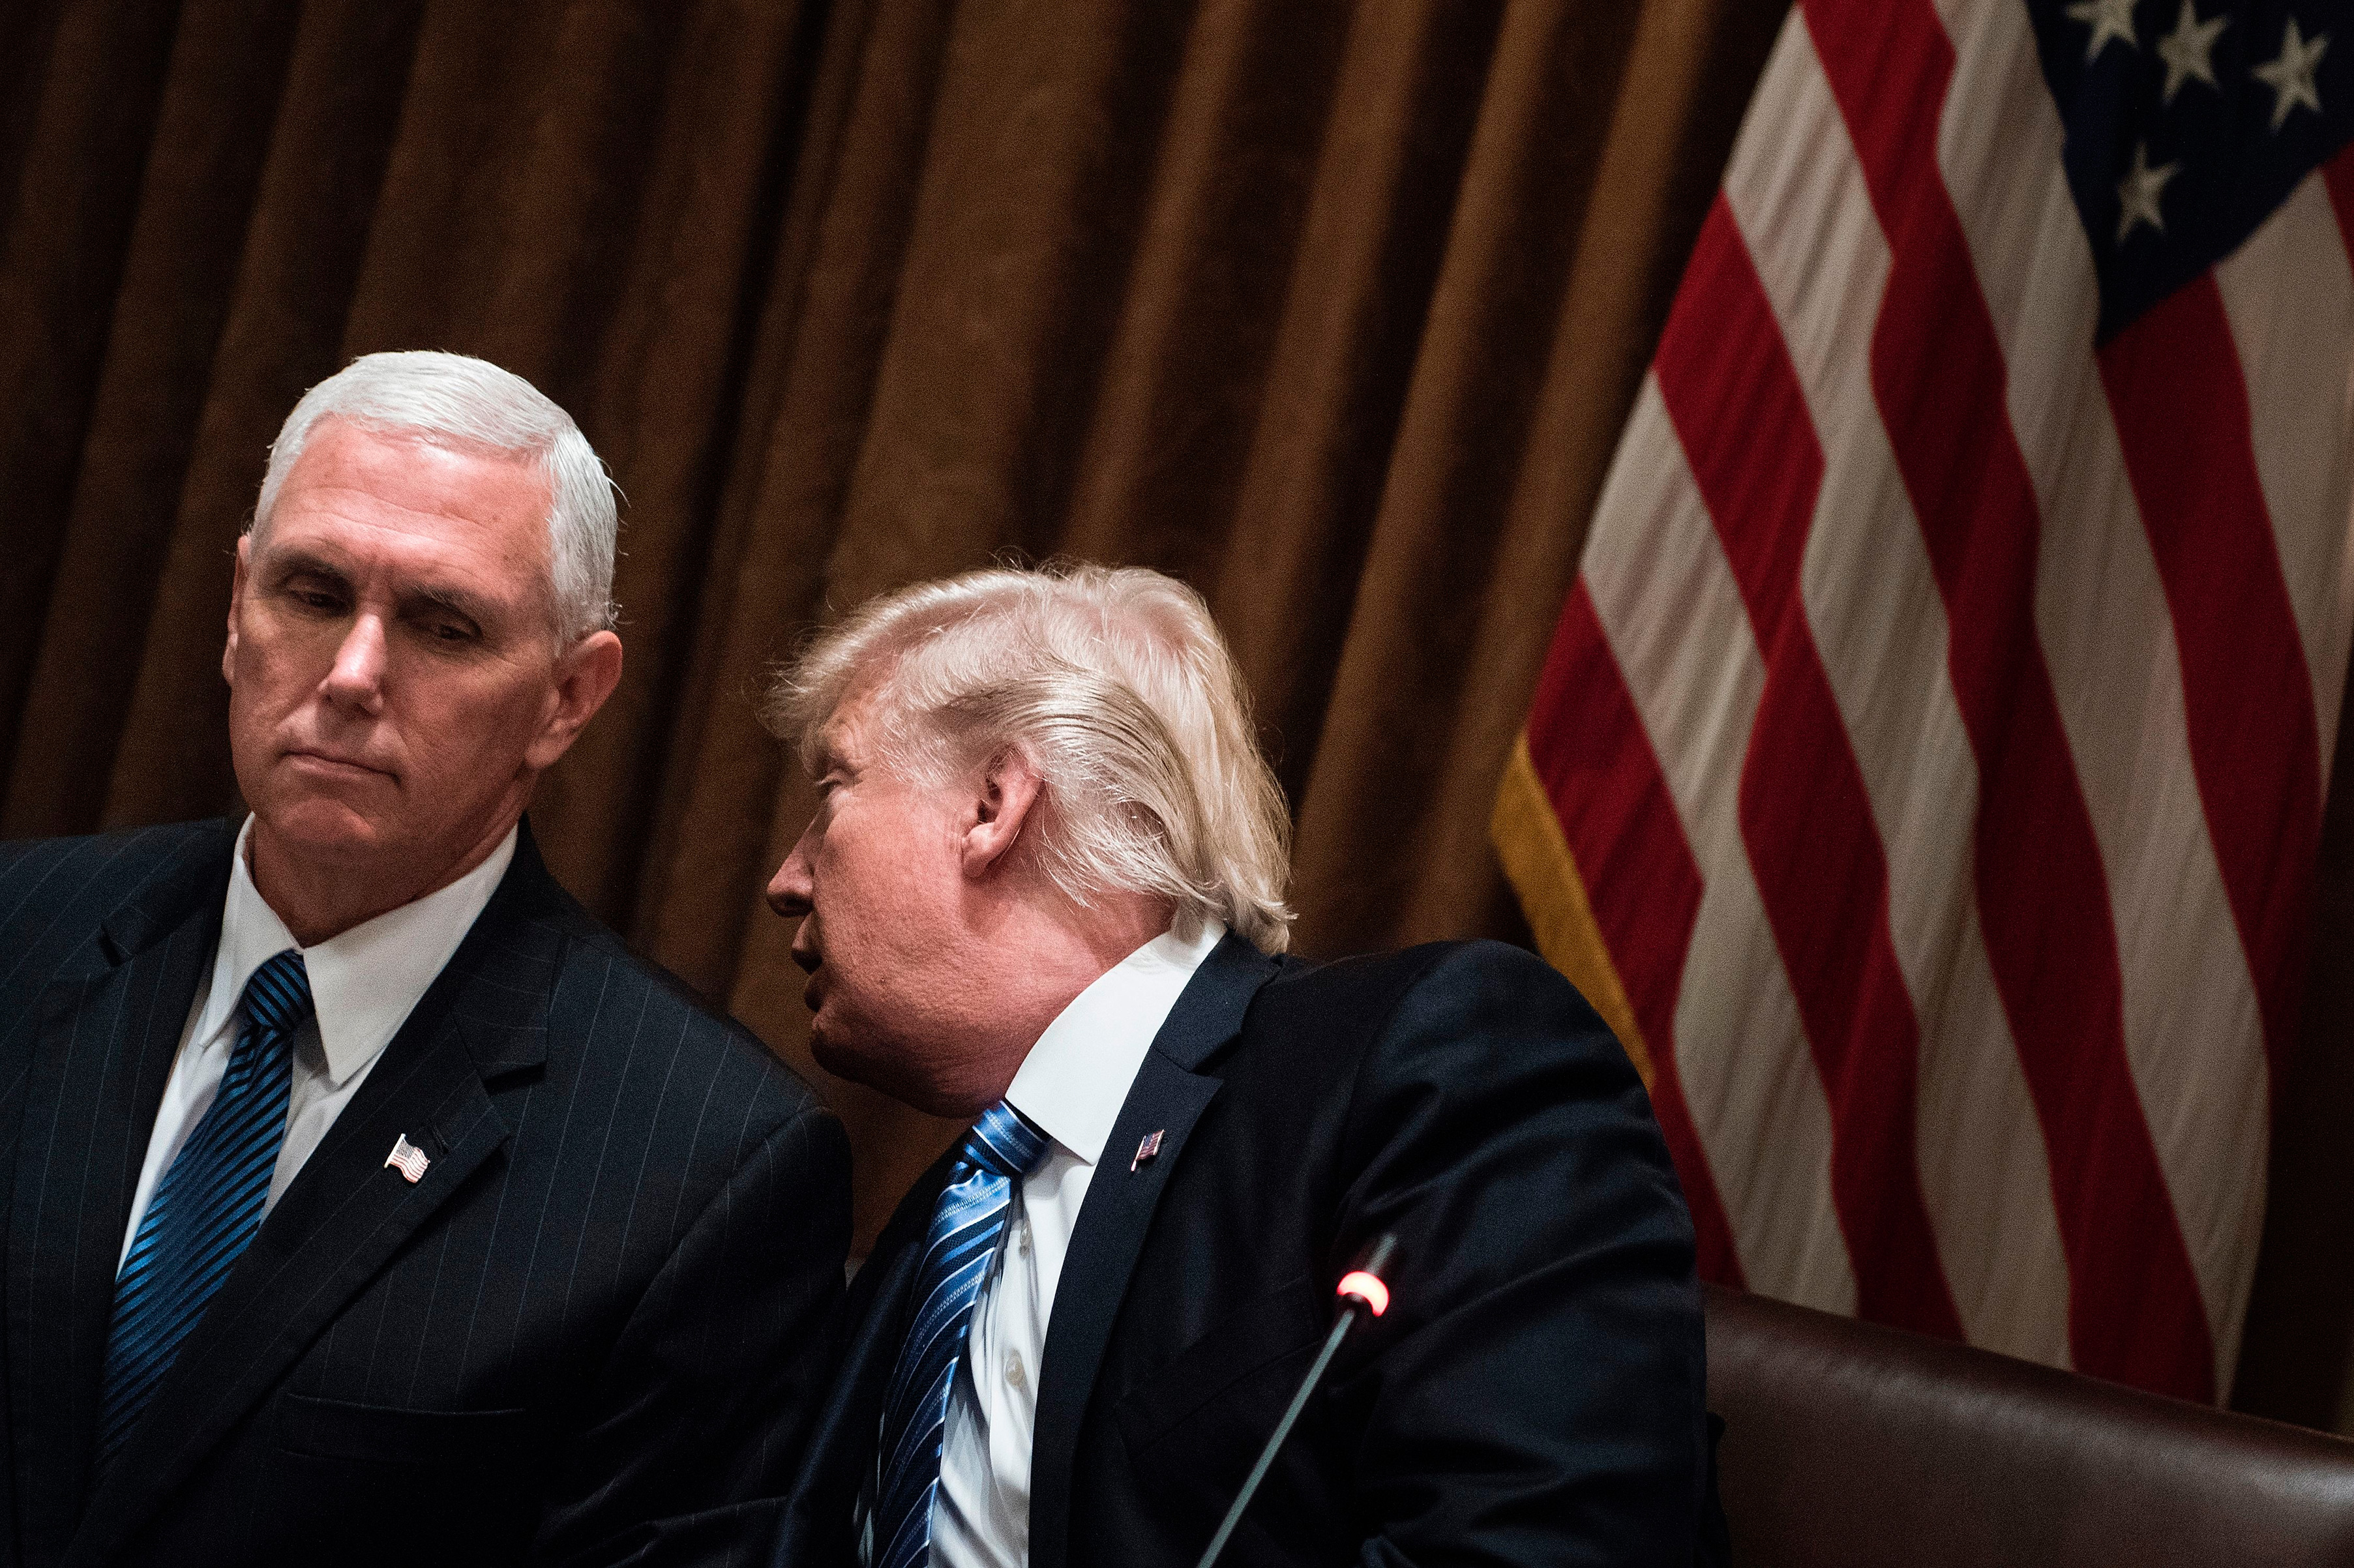 US President Donald Trump whispers to US Vice President Mike Pence before a meeting with South Korea's President Moon Jae-in in the Cabinet Room of the White House June 30, 2017 in Washington, DC. (Brendan Smialowski—AFP/Getty Images)